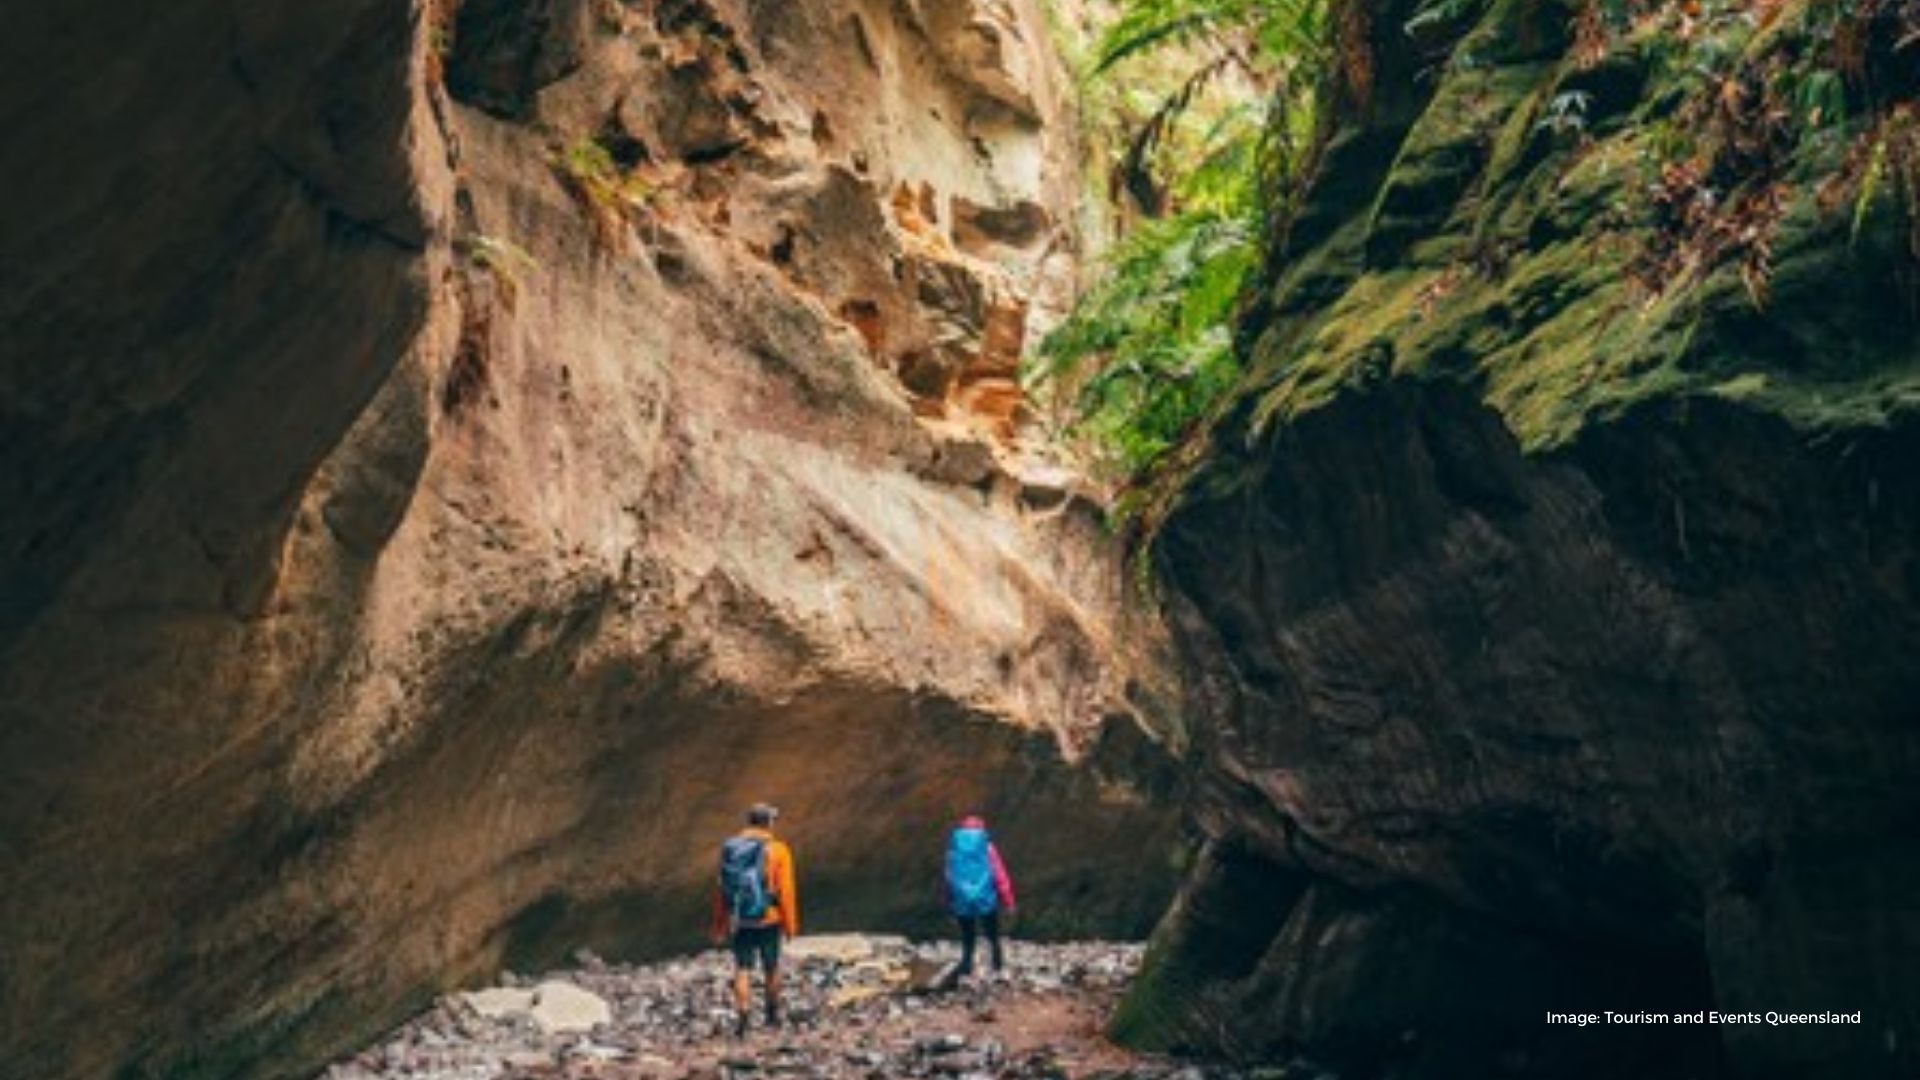 Two people walking through a towering gorge in the bush | Tourism & Events Queensland